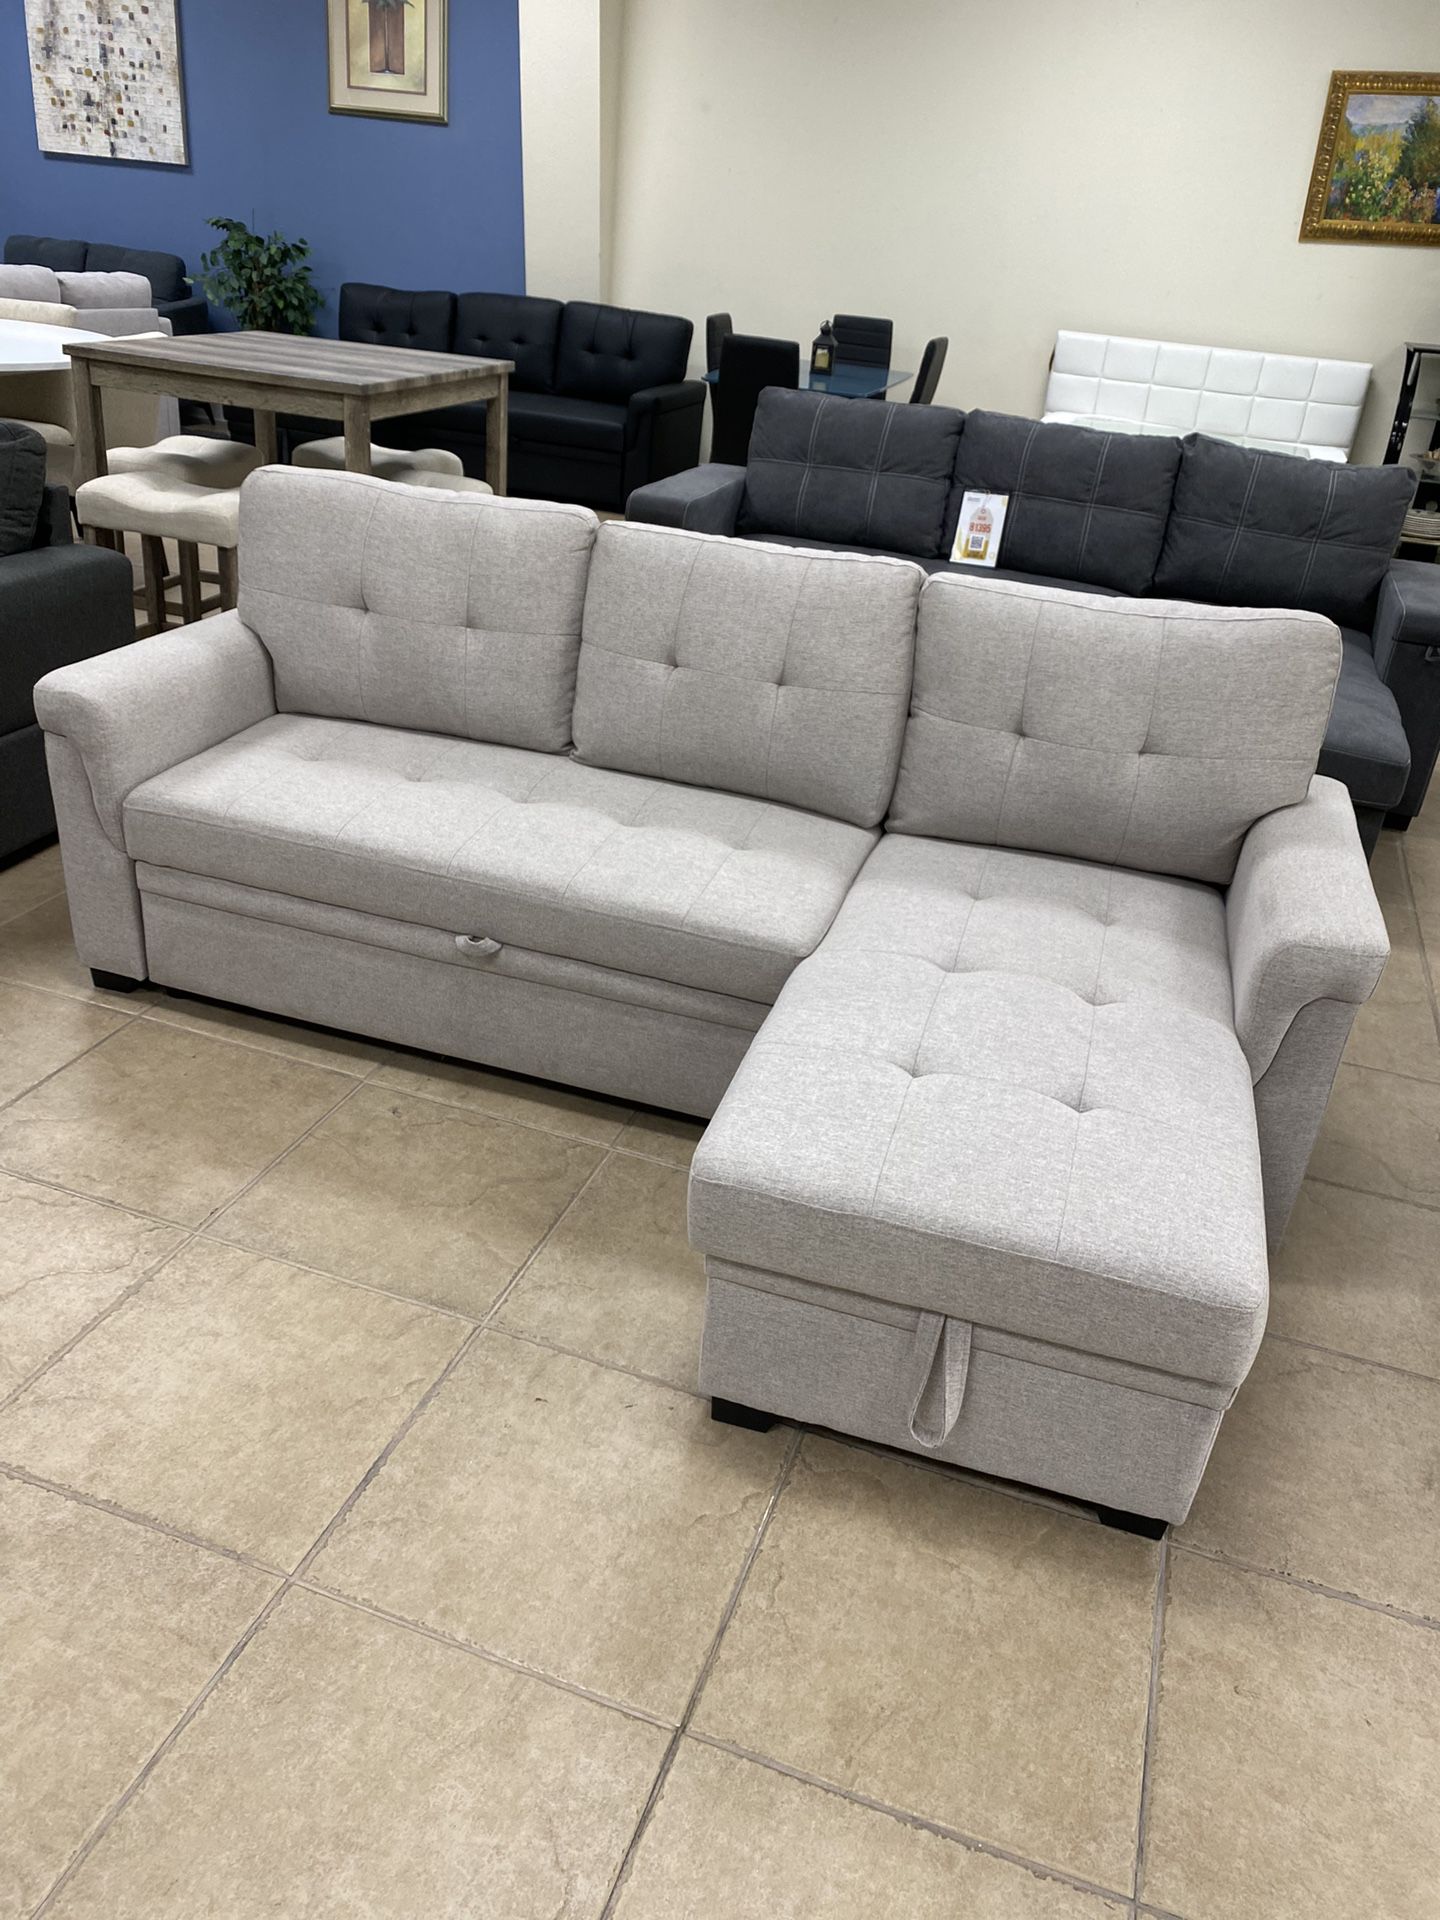 New Sofa Sleeper Sectional Couch ( Reversible )